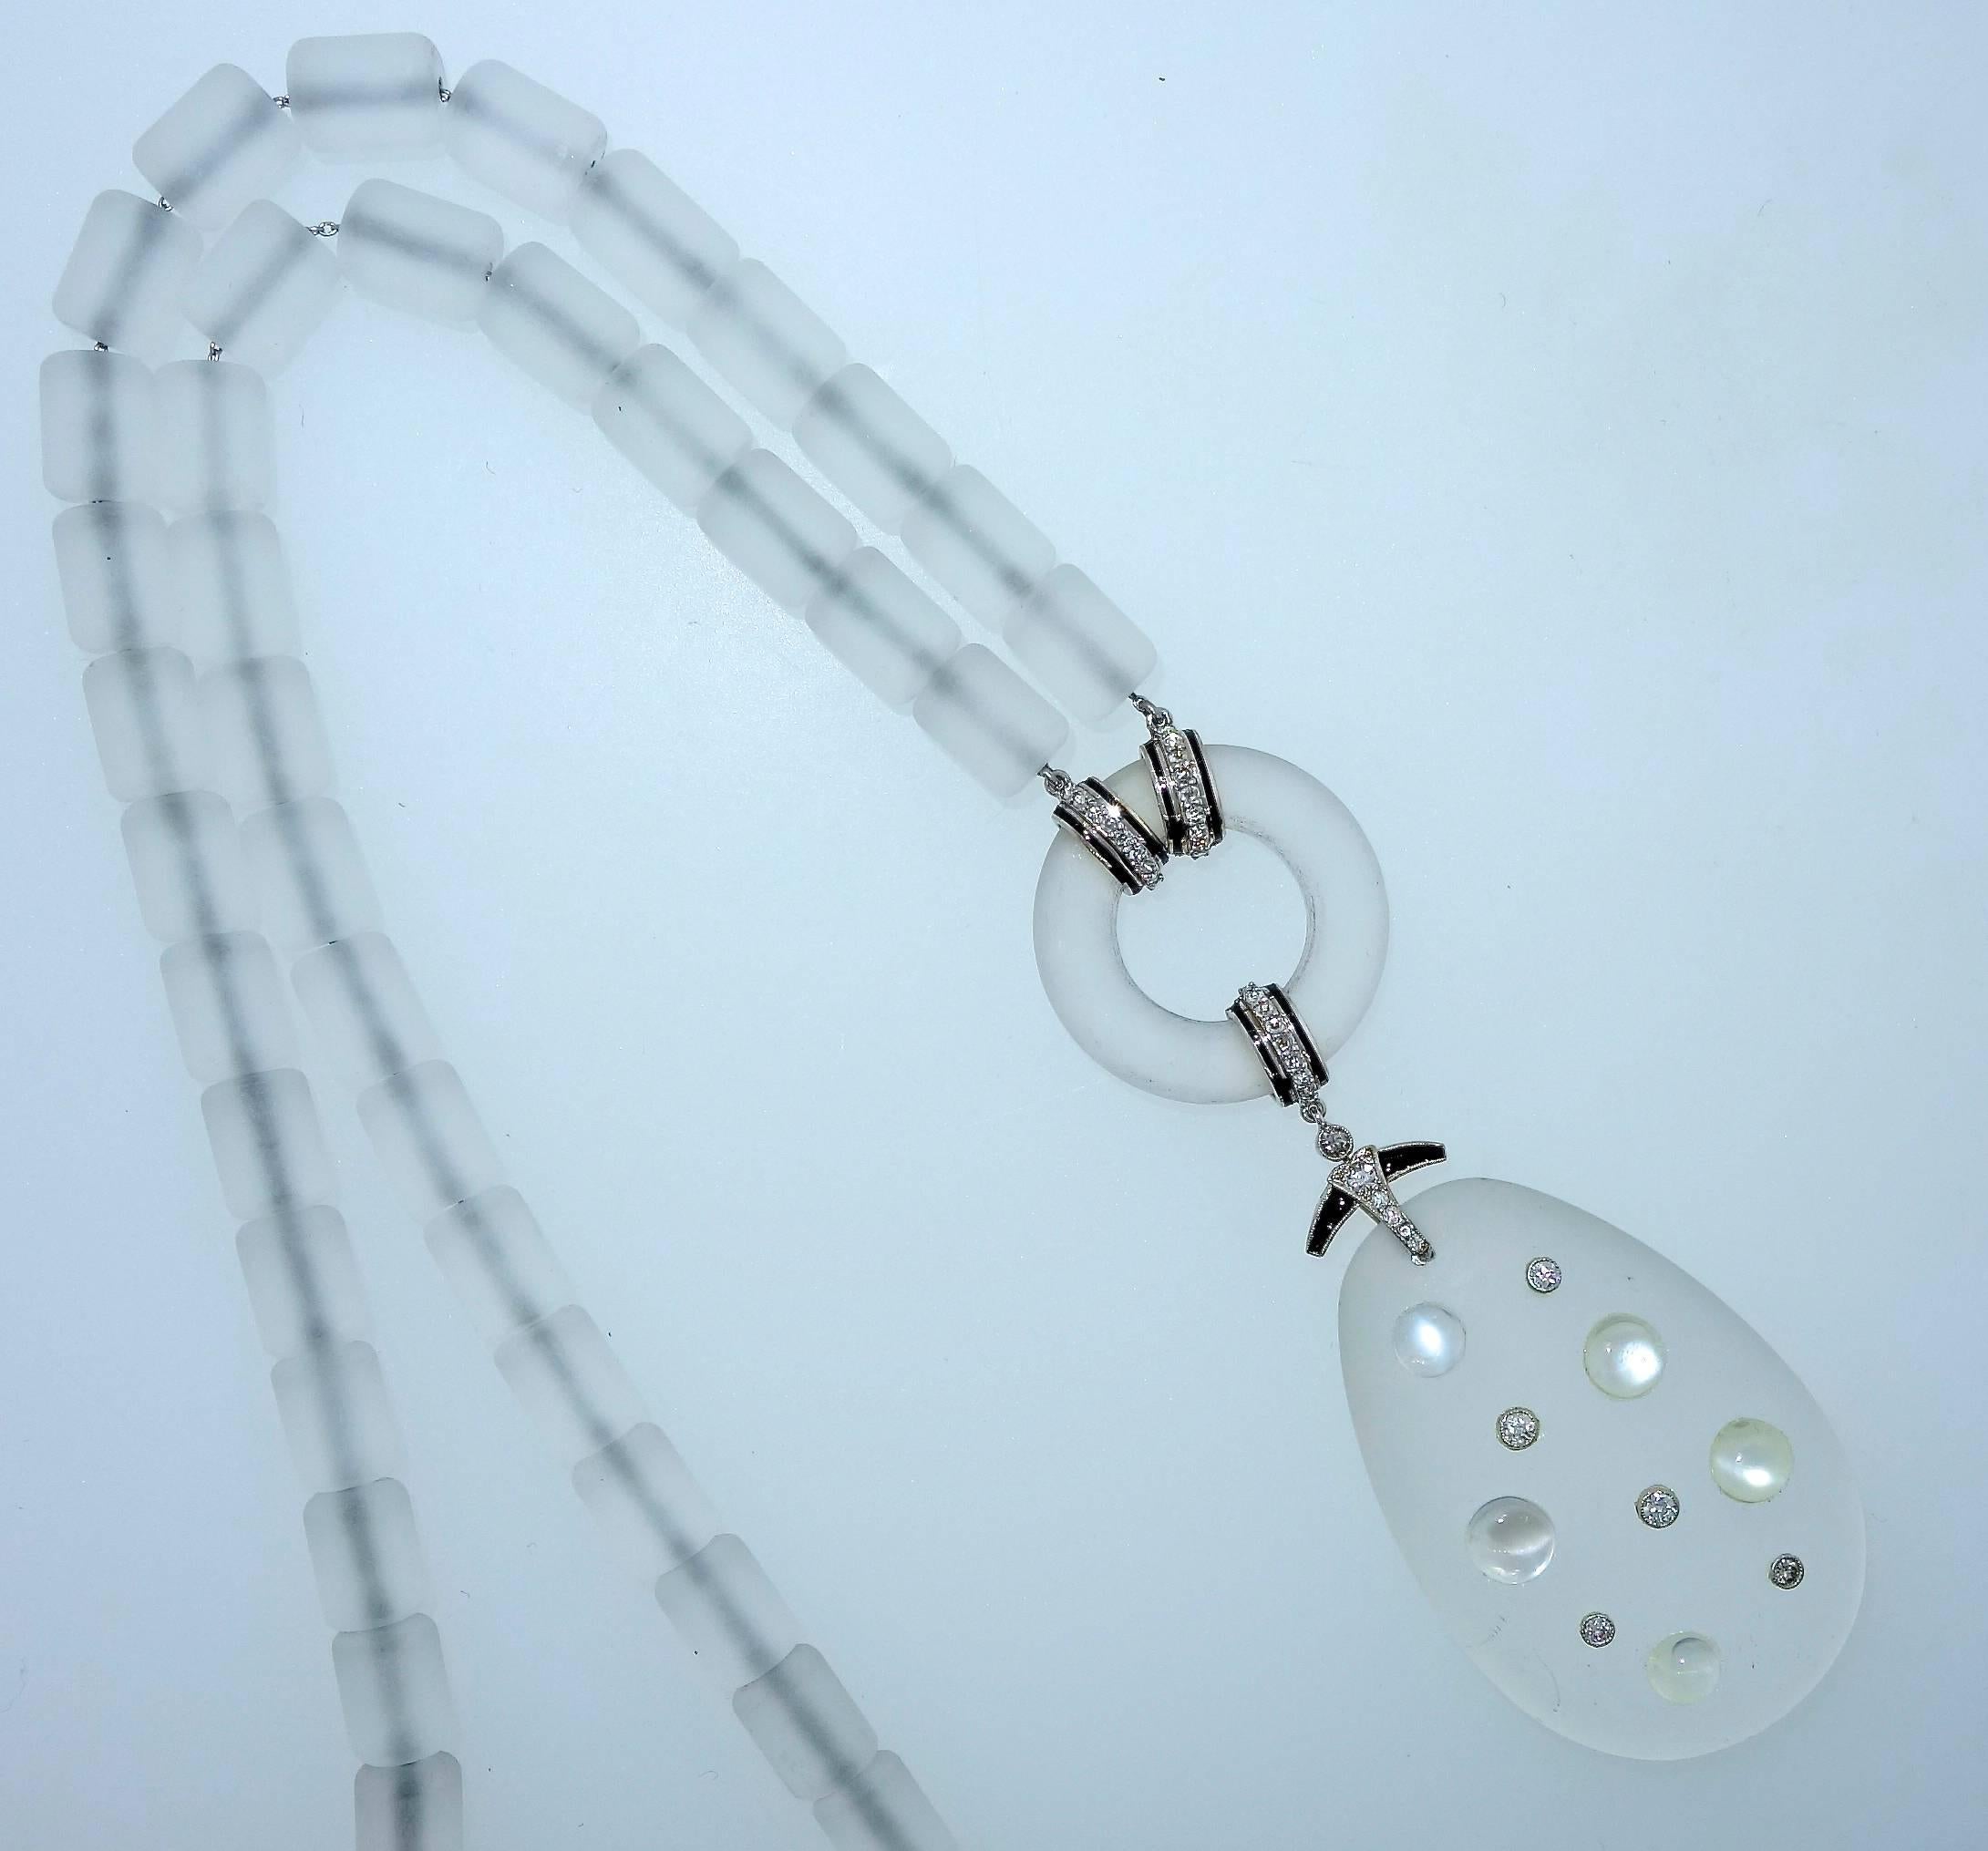 Early 20th century French design, blanc de blanc, platinum necklace.  The tear drop frosted rock crystal pendant portion is set with moonstone and old cut diamonds.  It is suspended from  black enamel, onyx and old cut diamonds.   The rock crystal